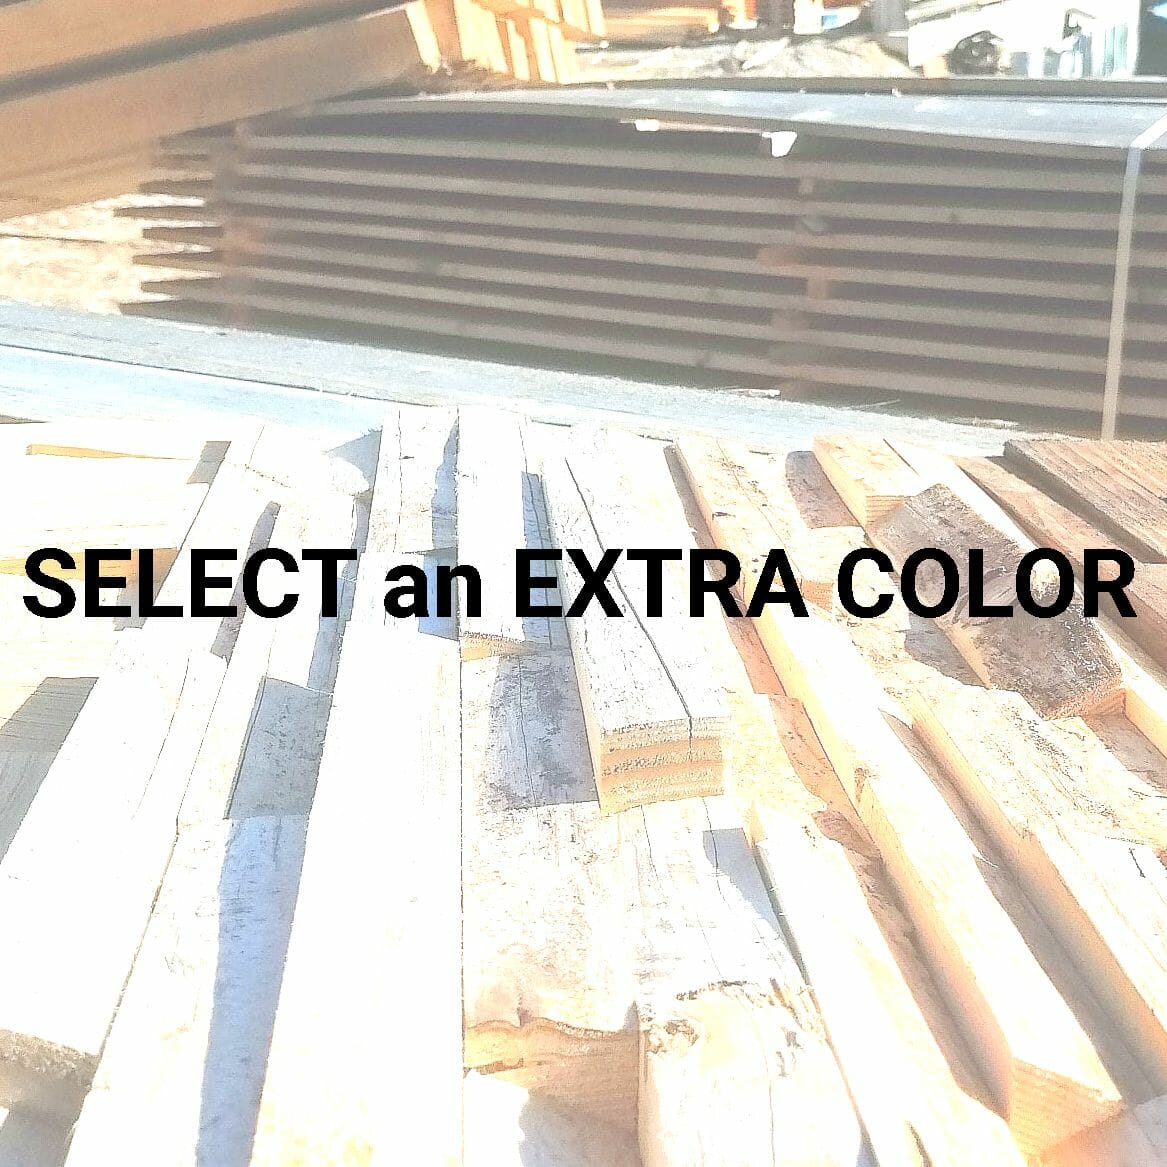 Select extra color